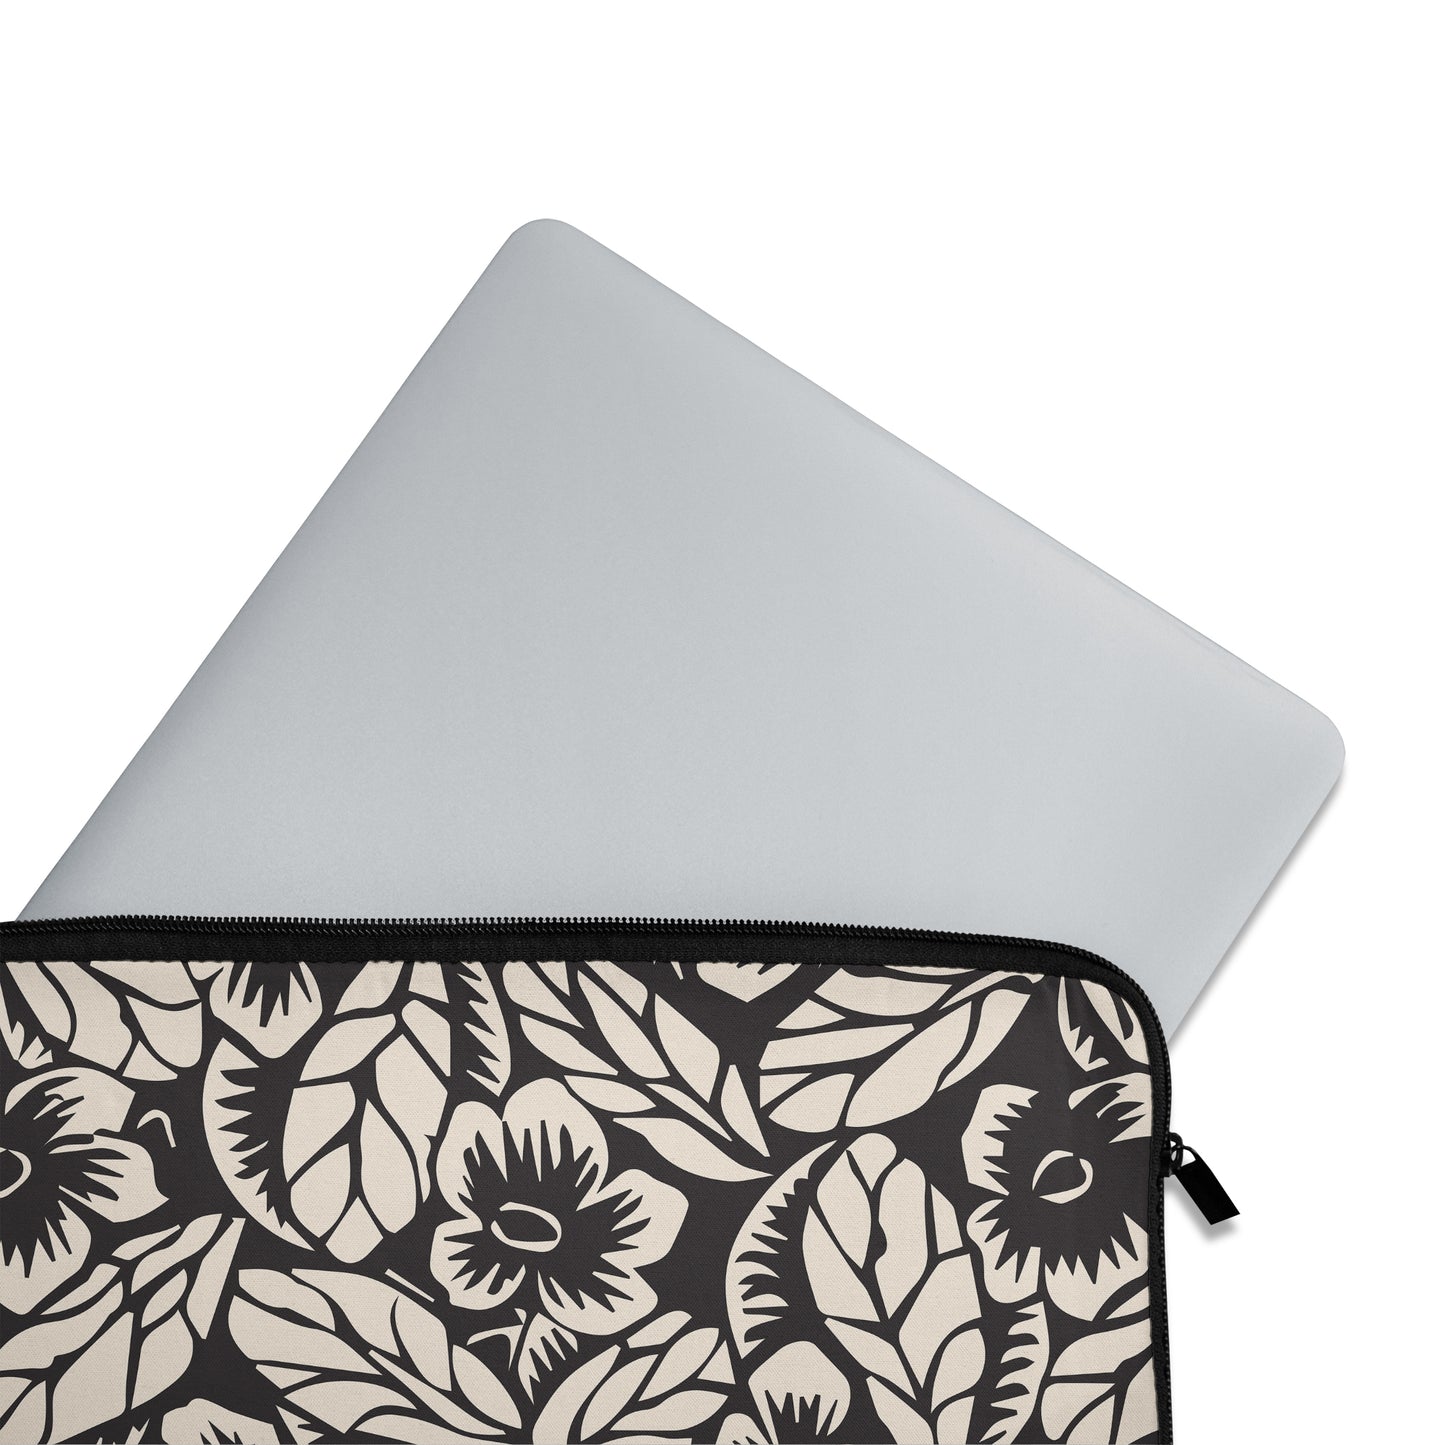 Black and White Floral Macbook Case